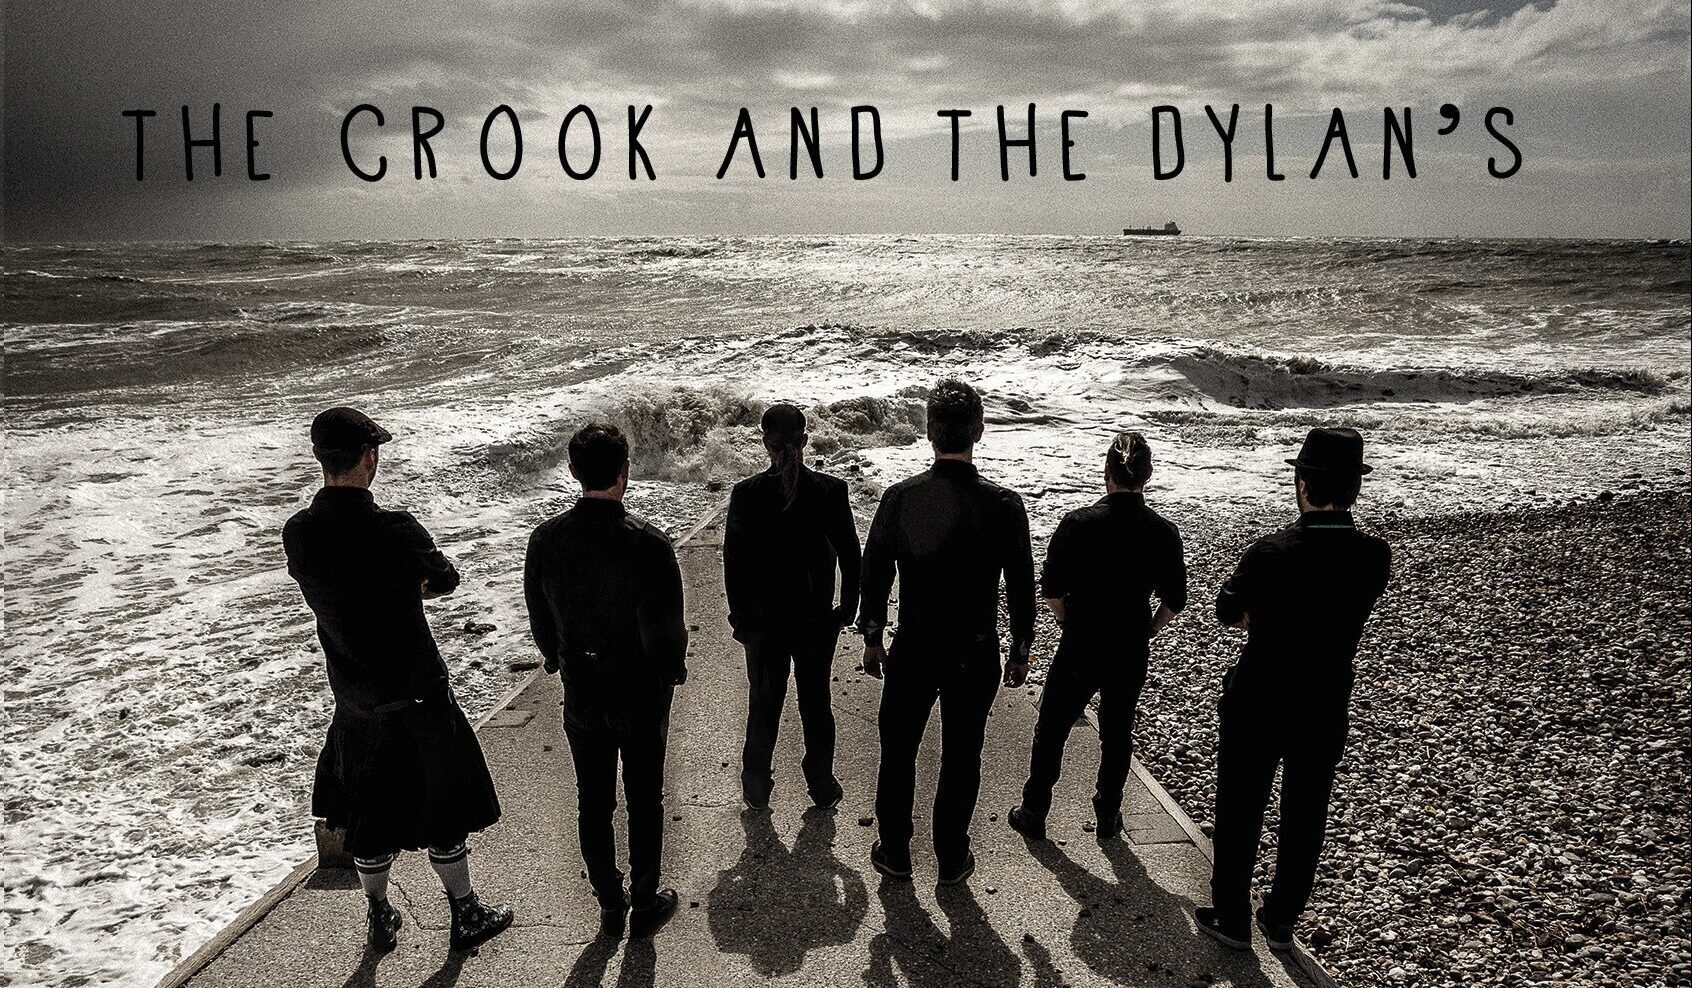 The Crook and The Dylan's